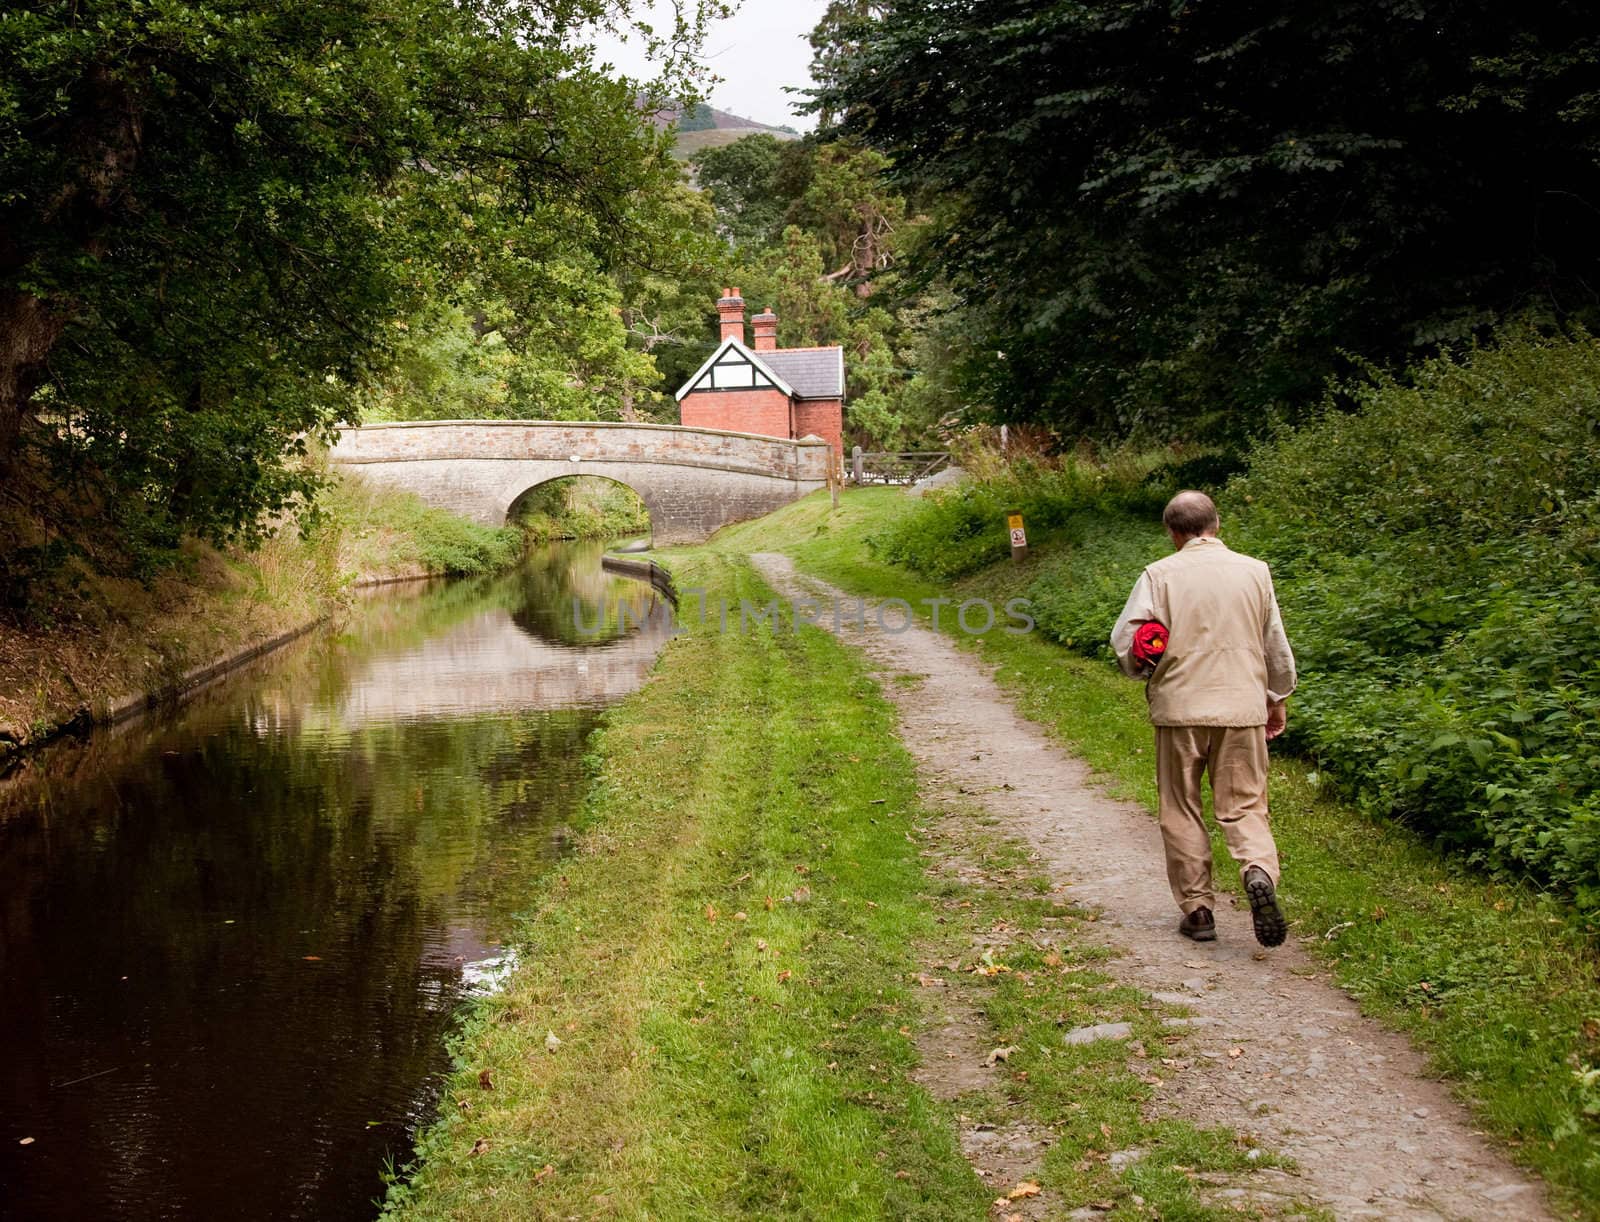 Hiker walking along canal in Shropshire by steheap